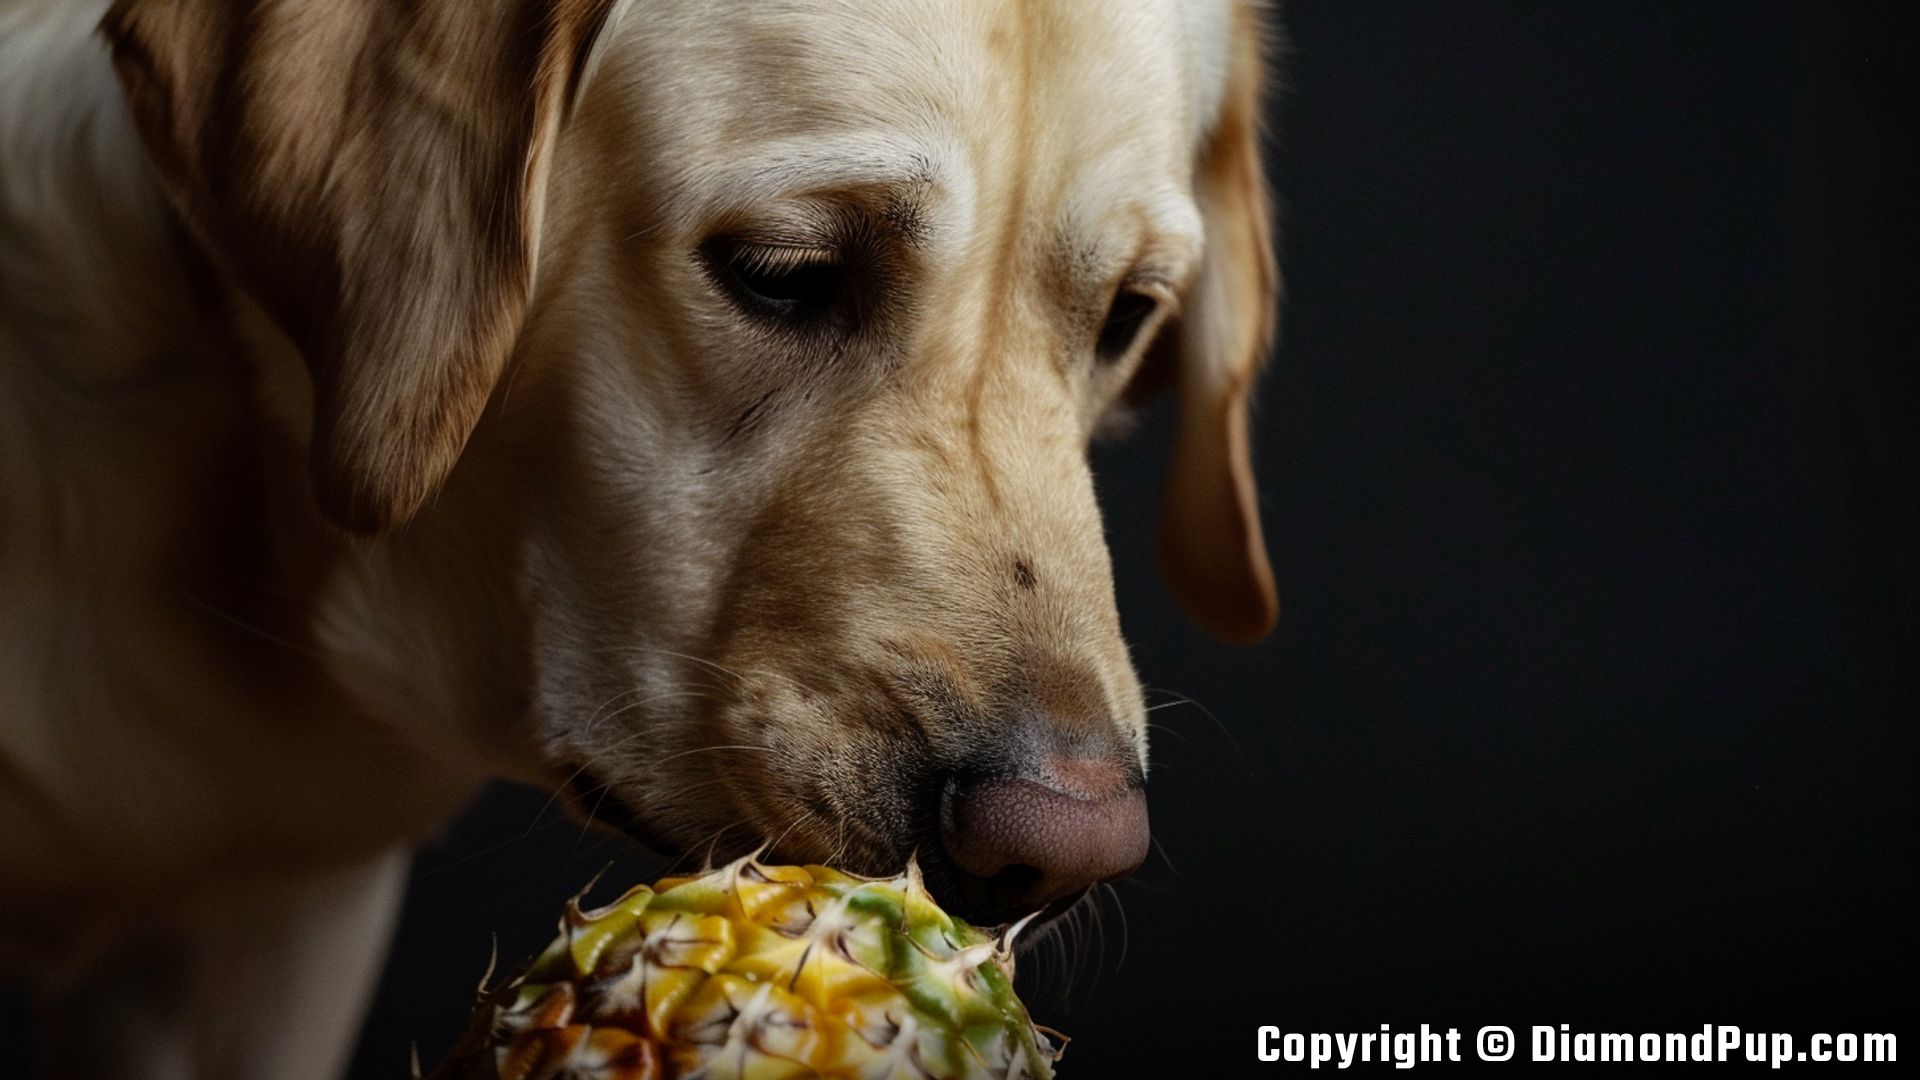 Image of a Cute Labrador Eating Pineapple